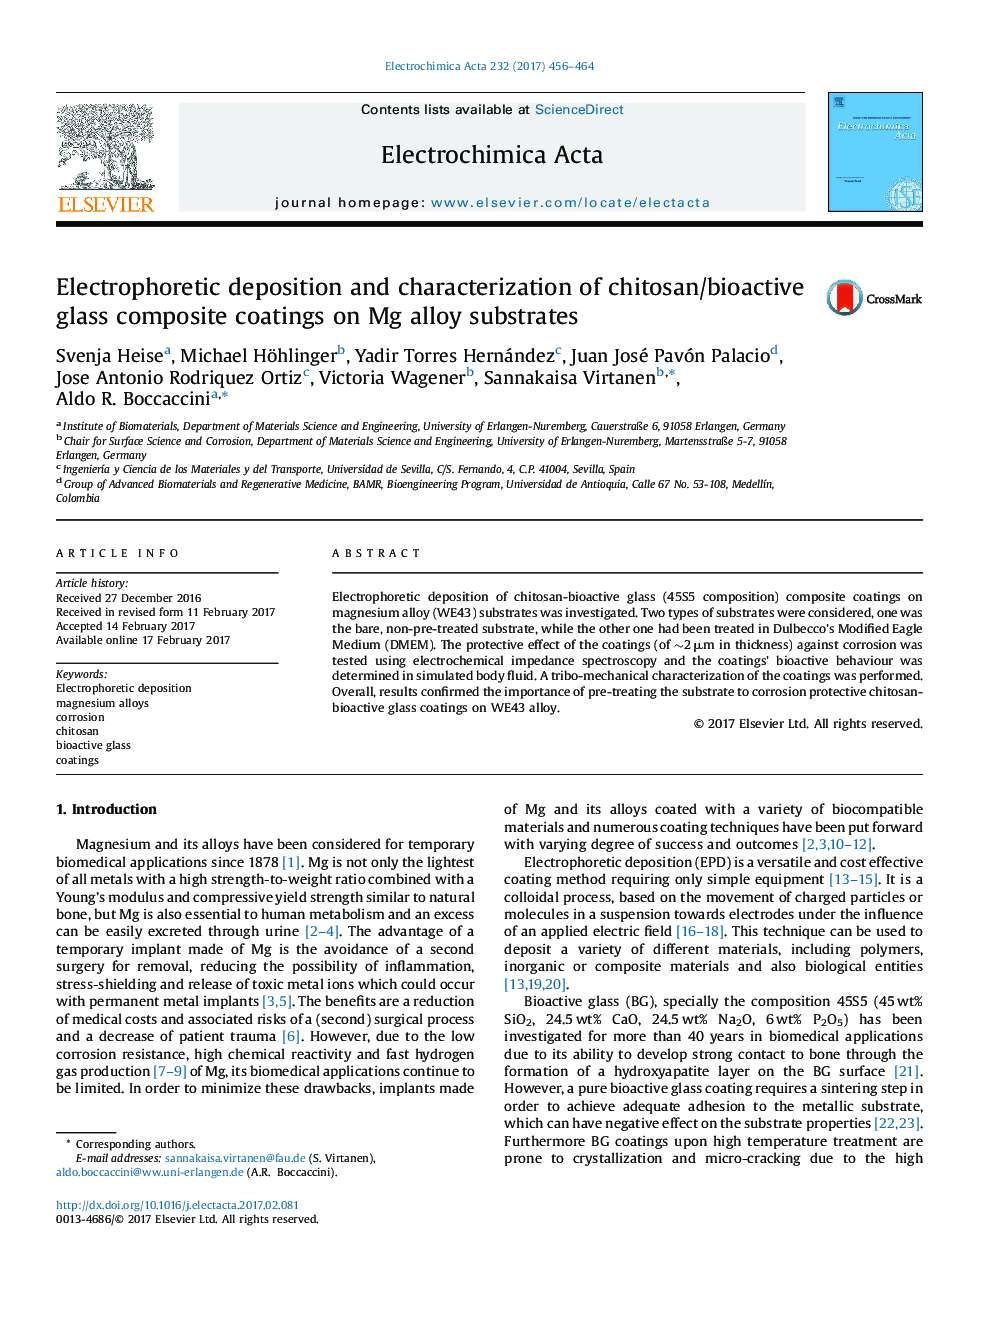 Electrophoretic deposition and characterization of chitosan/bioactive glass composite coatings on Mg alloy substrates